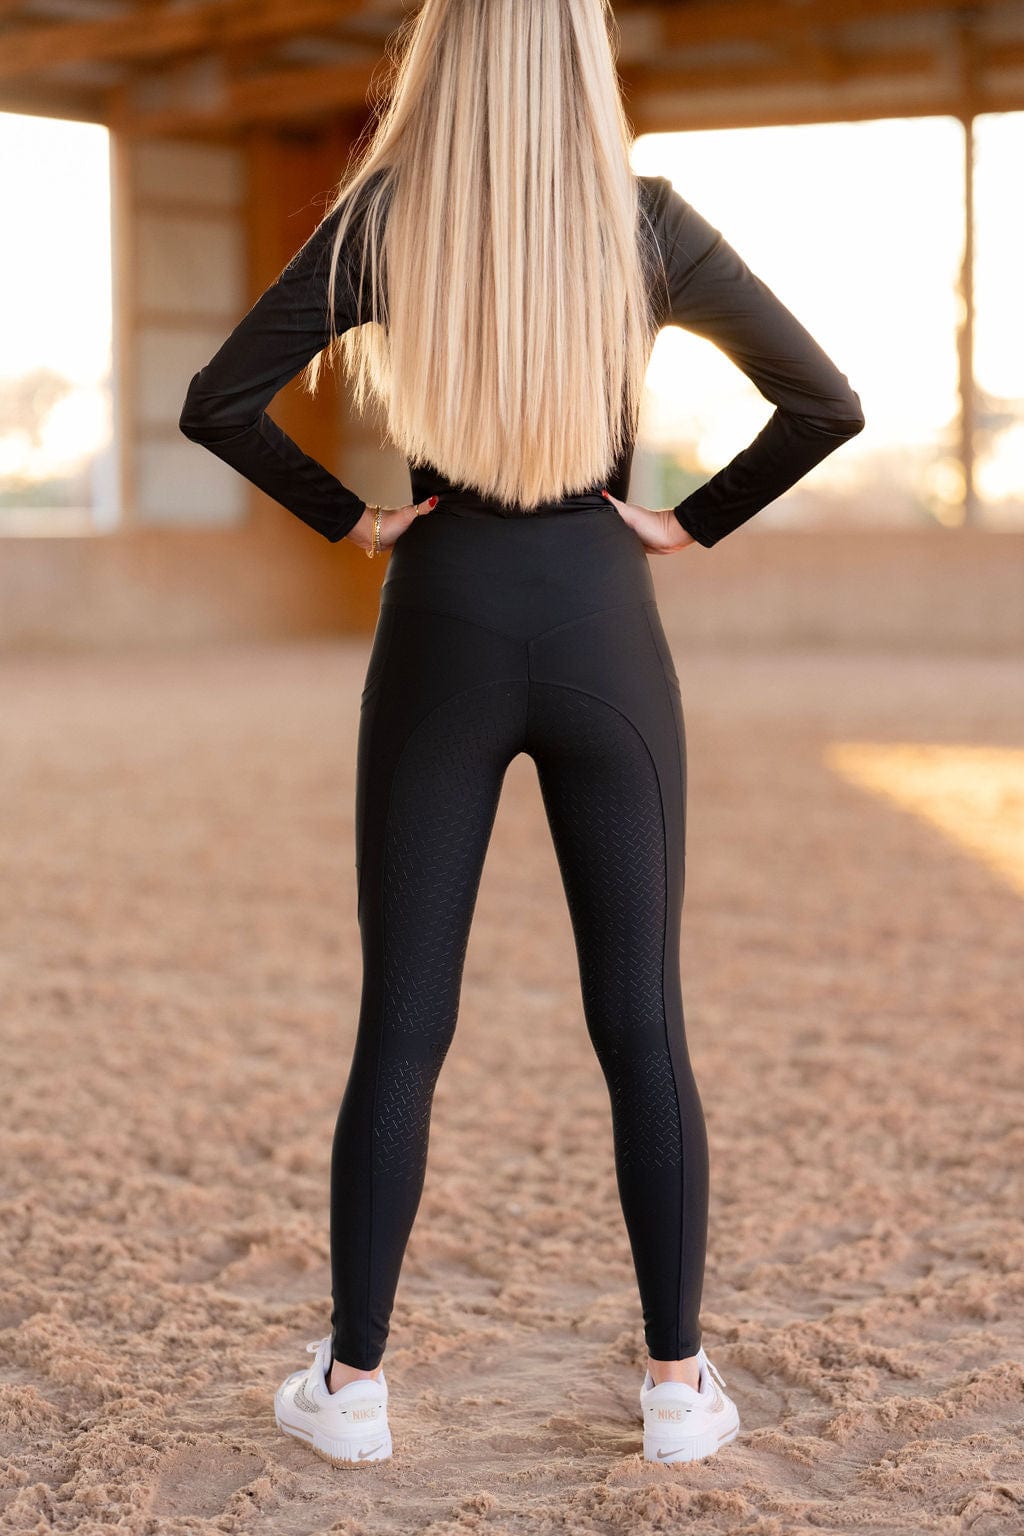 High Waisted Riding Tights. – Rubenesque Rider